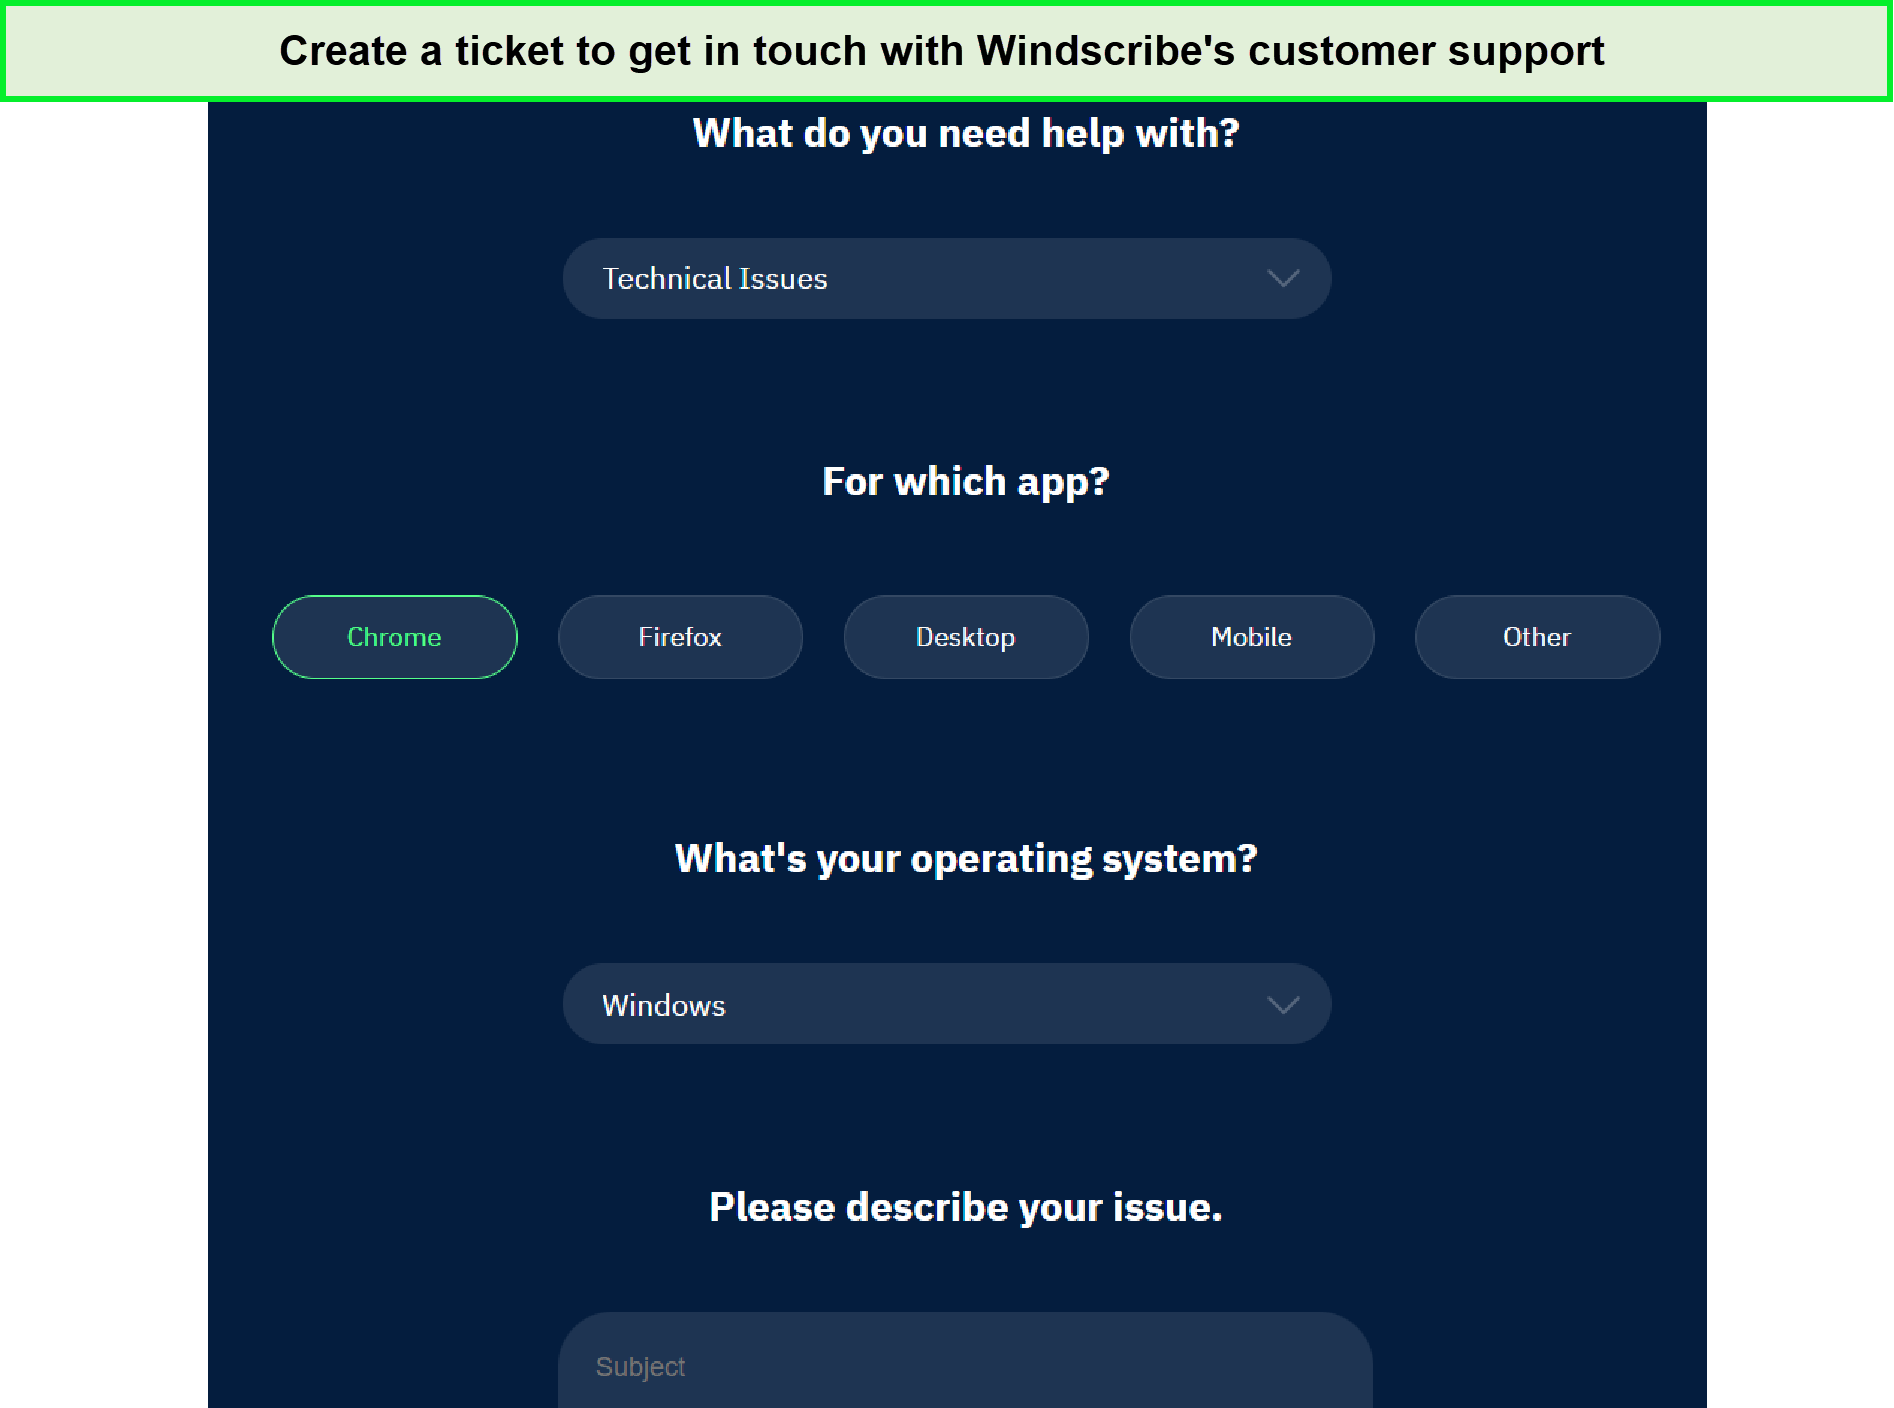 windscribe-ticket-system-in-Singapore